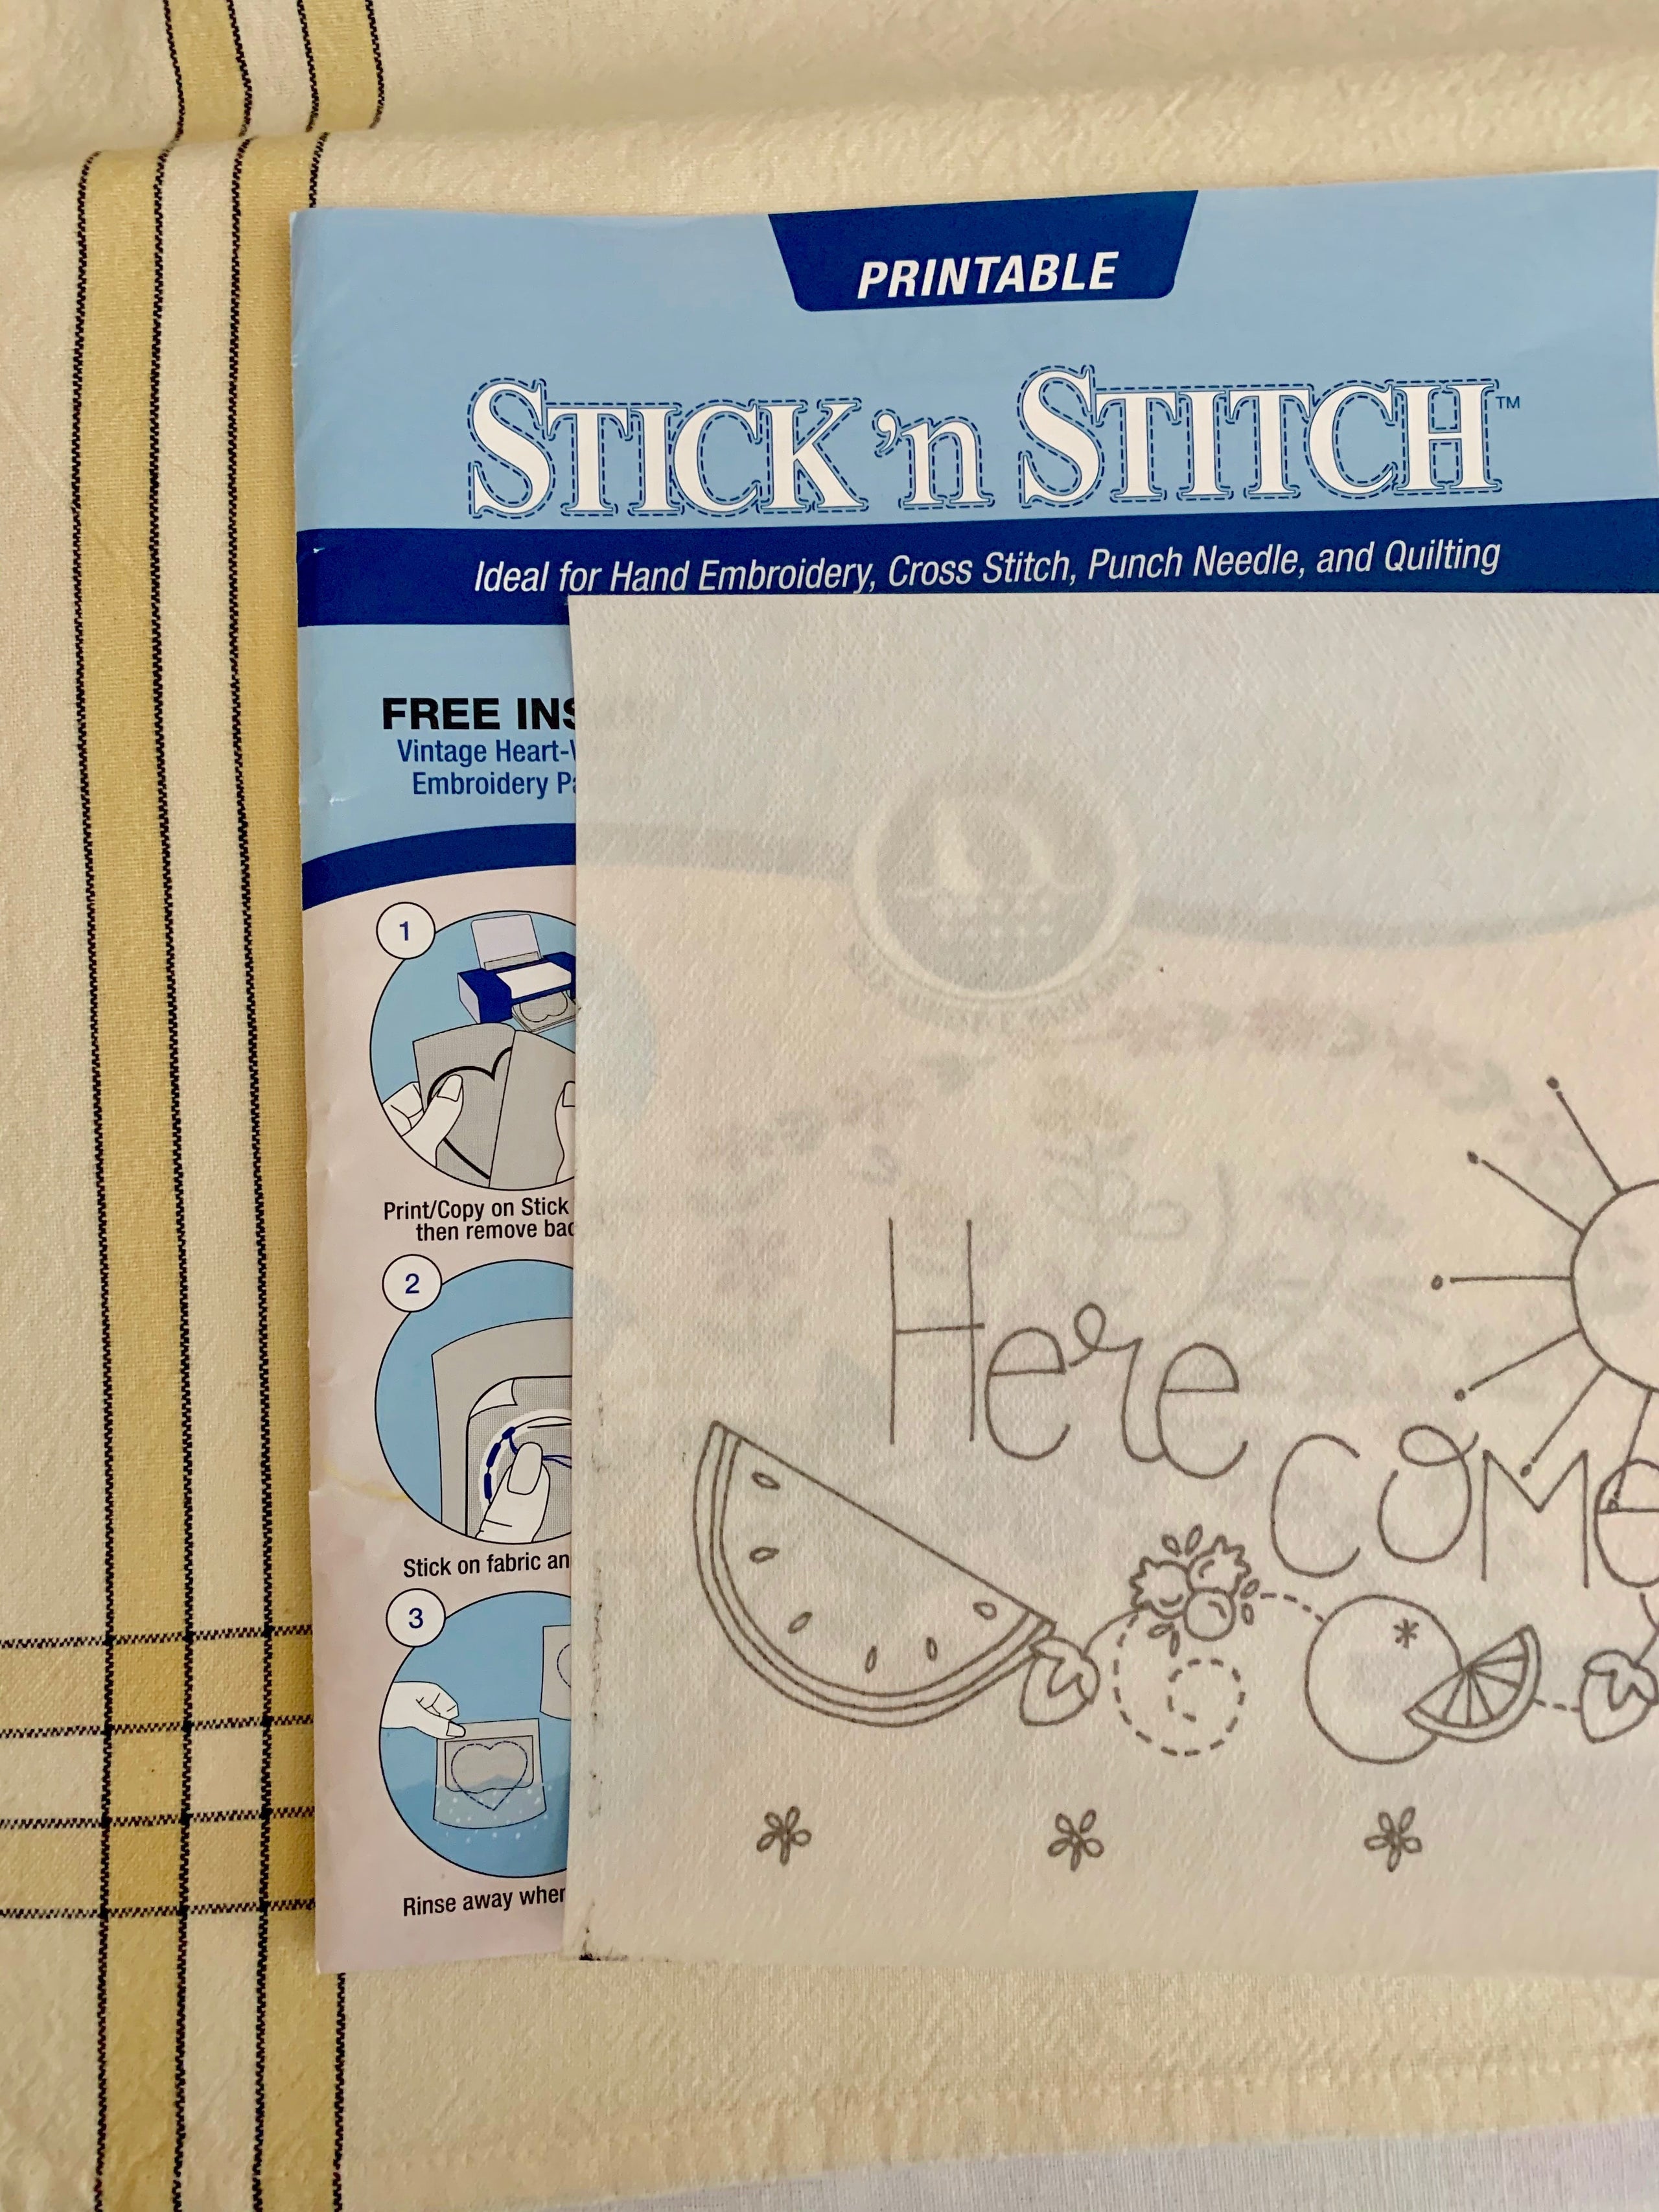 Sulky® Stick 'N Stitch™ Printable 8-1/2 x 11 Sheets - 12 per pack.